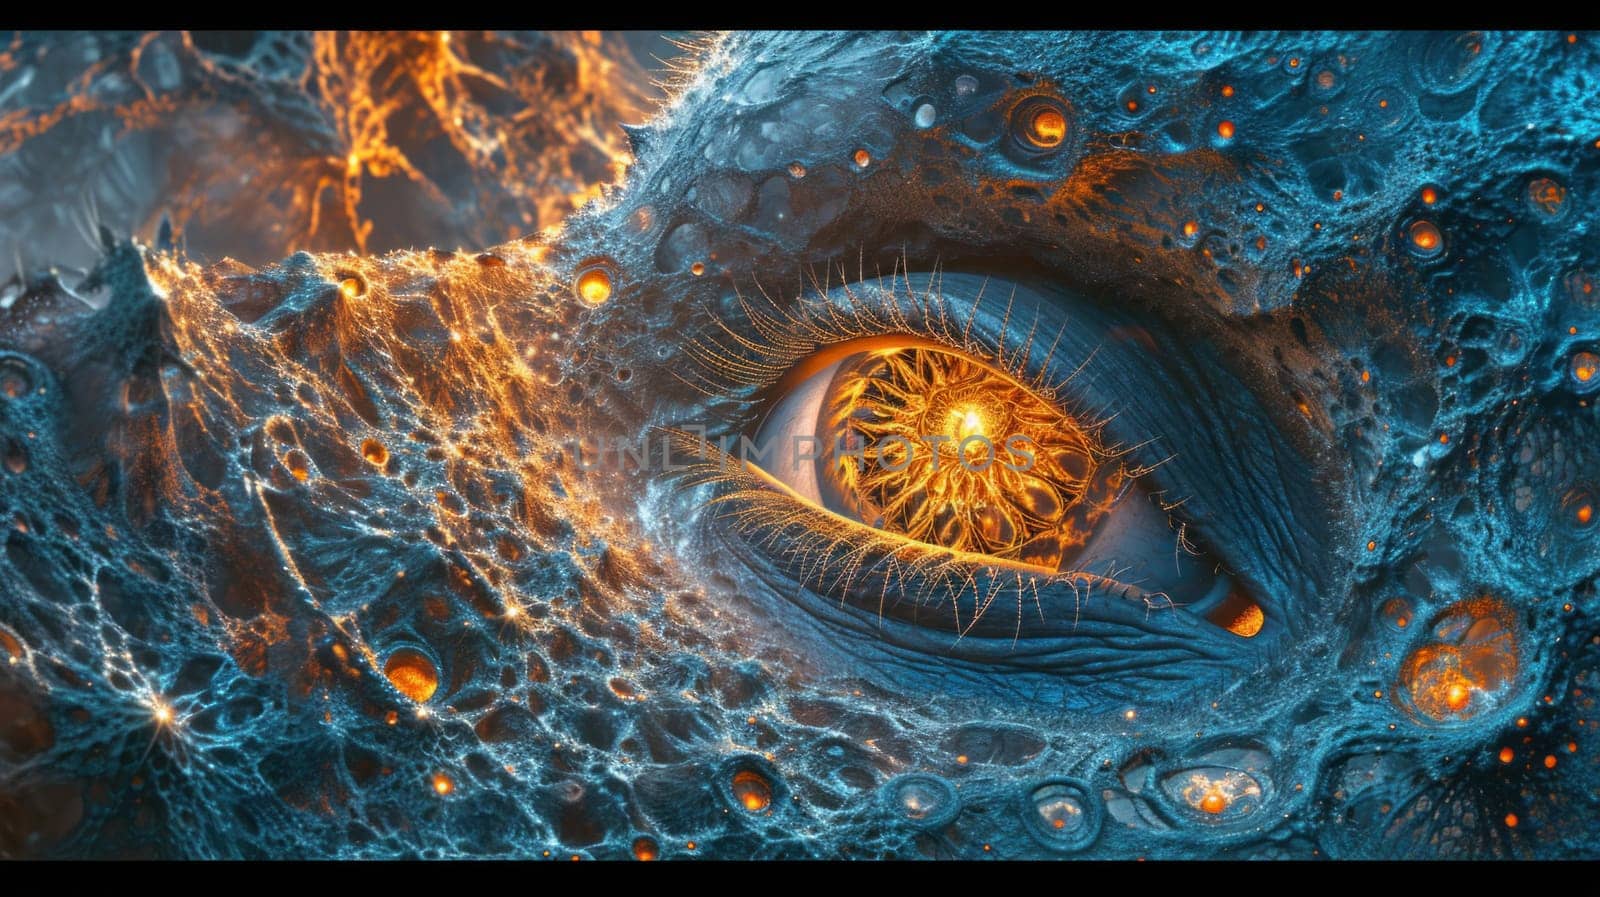 A close up of a blue dragon with an eye that is glowing